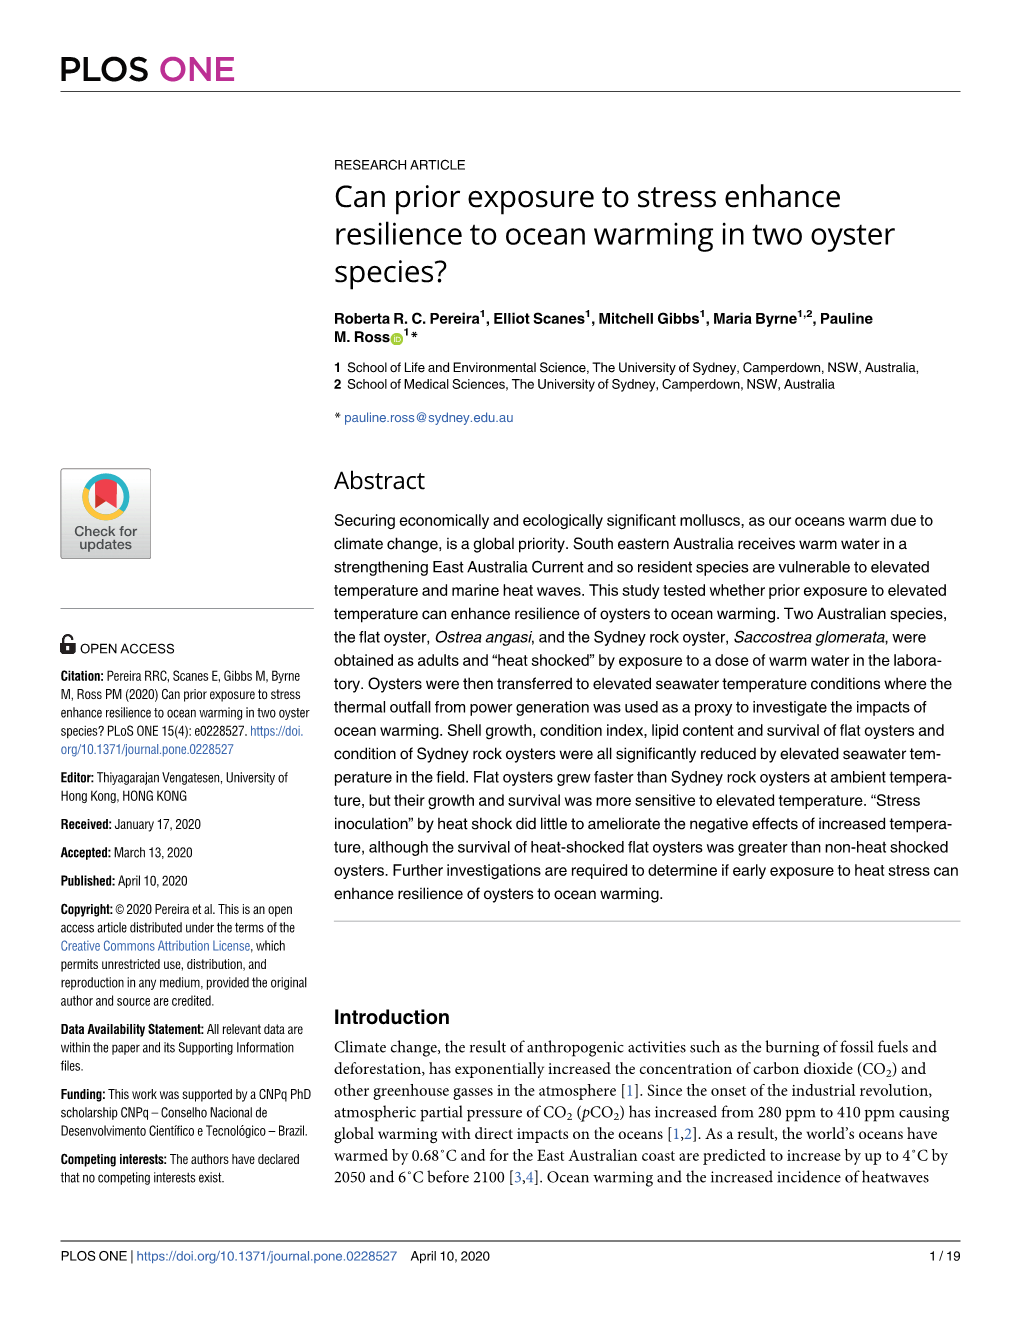 Can Prior Exposure to Stress Enhance Resilience to Ocean Warming in Two Oyster Species?